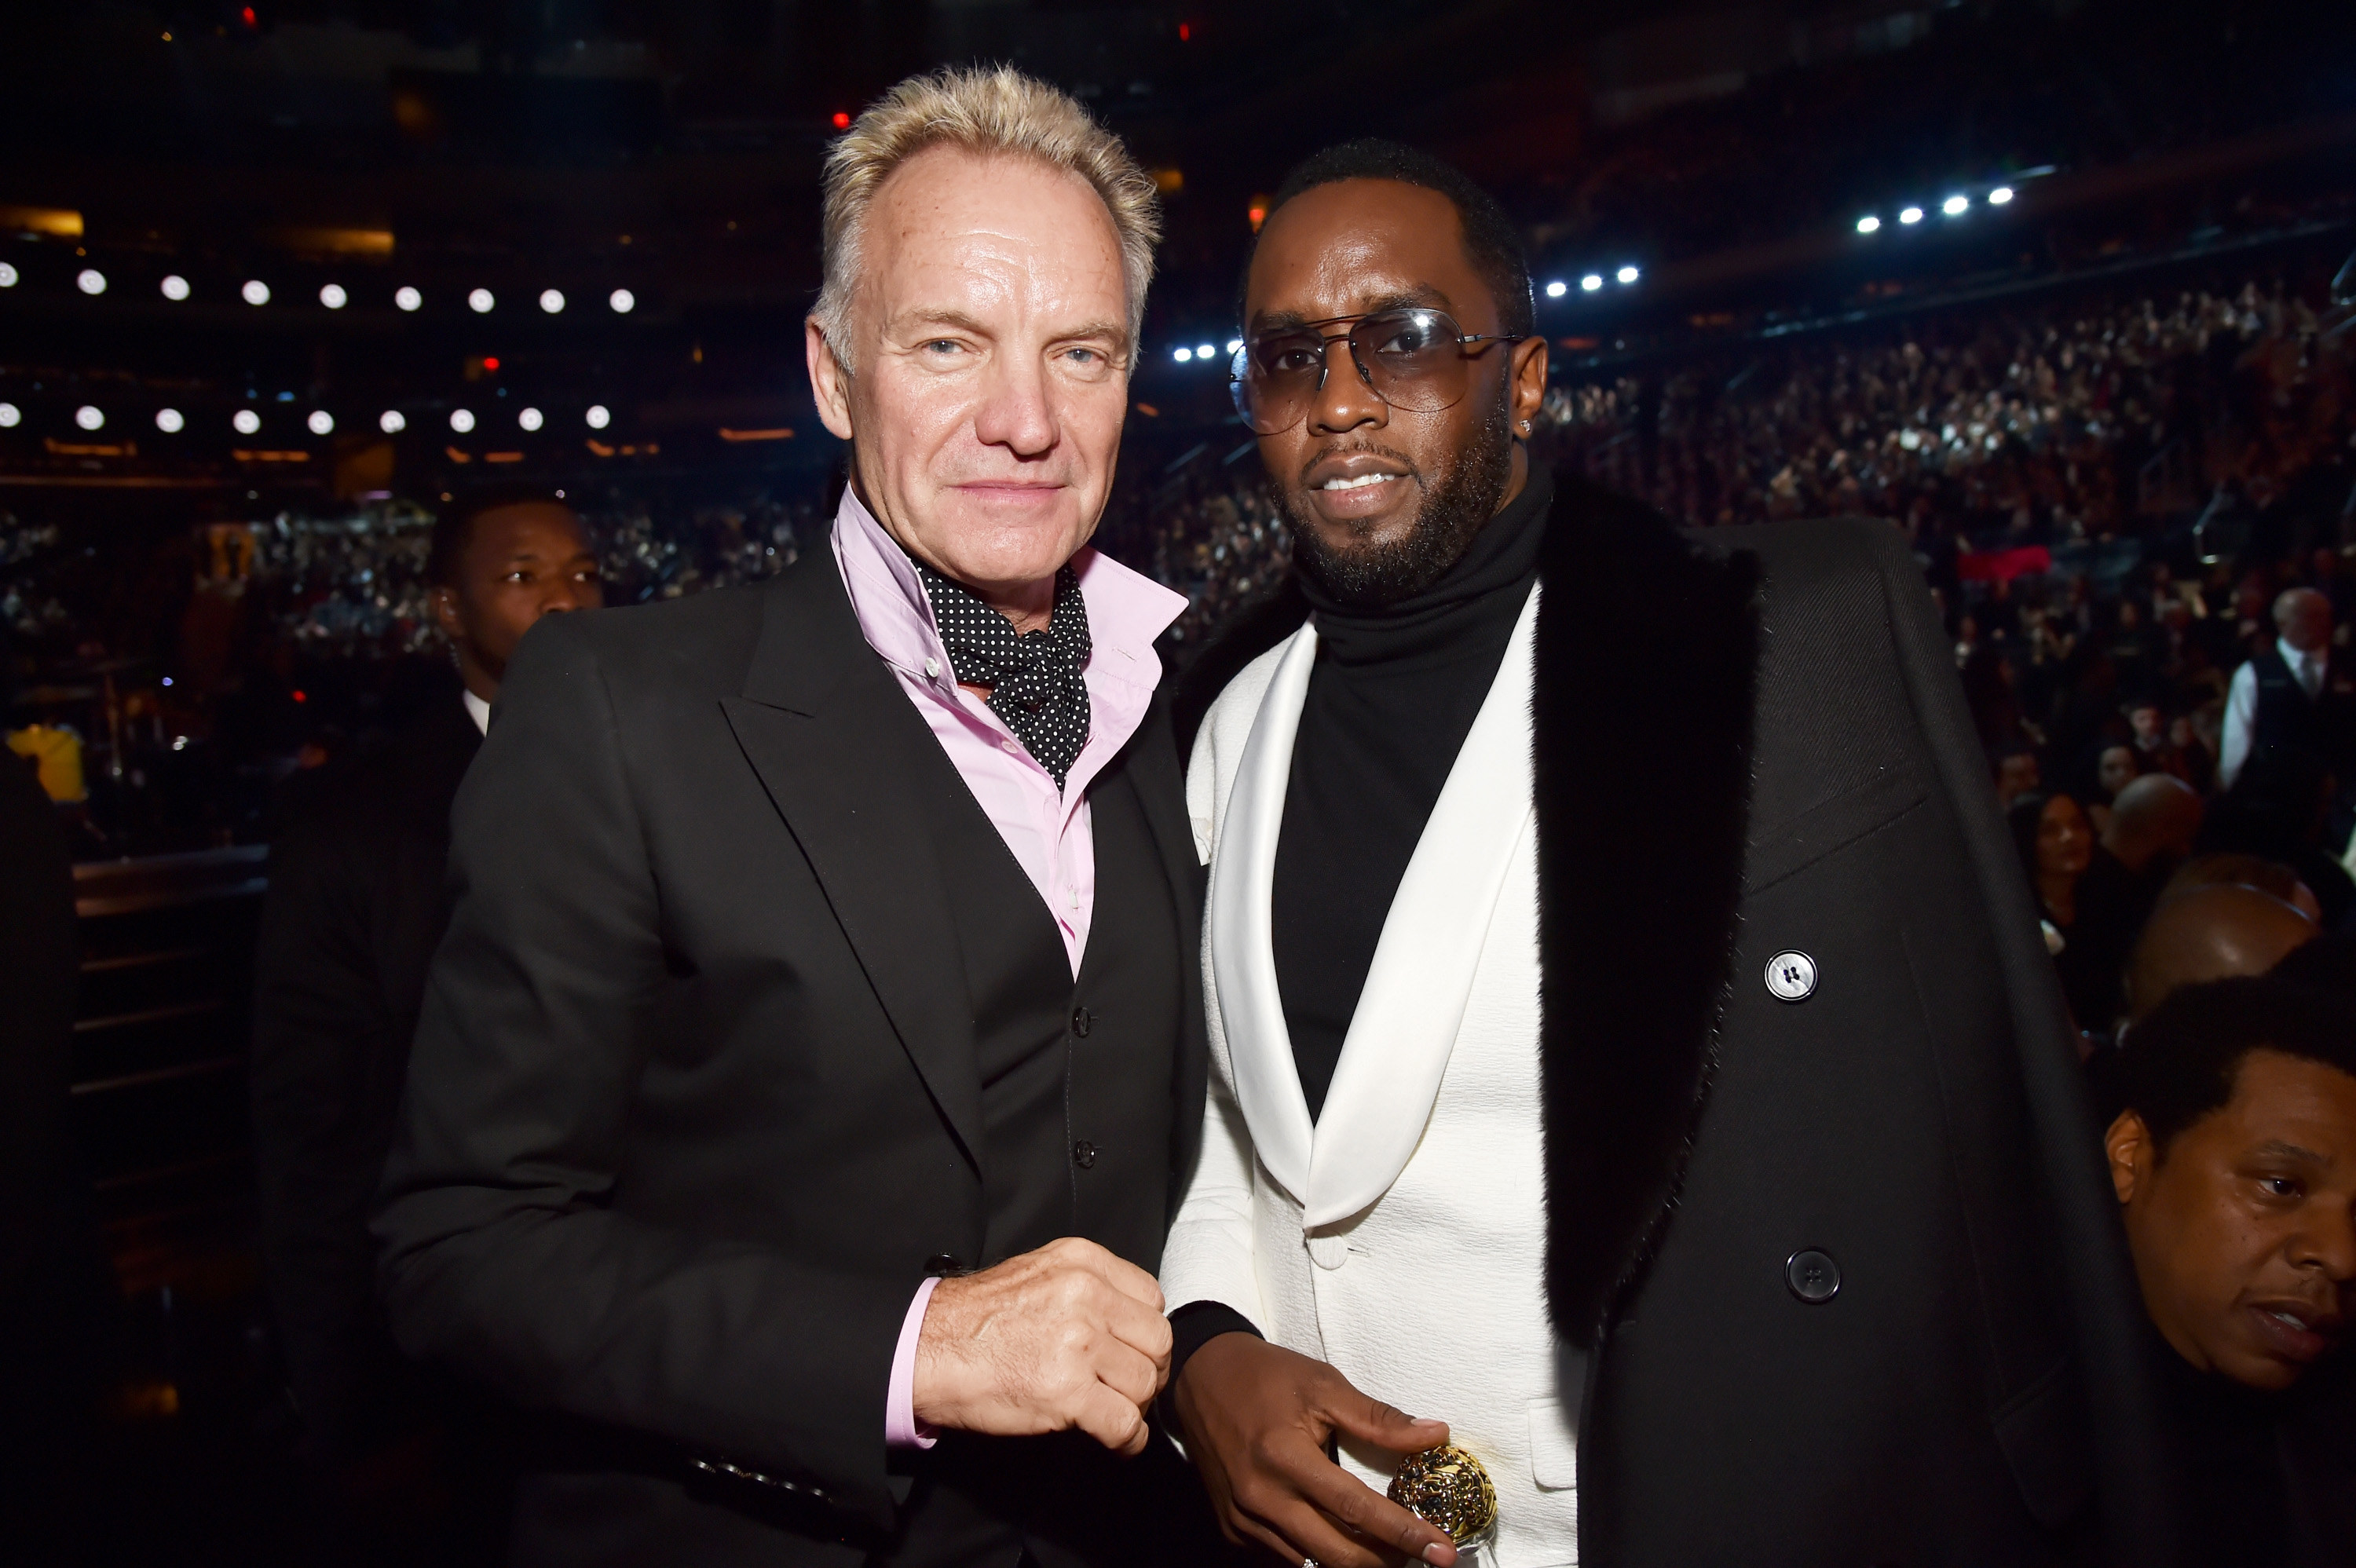 Sting and Diddy at an event